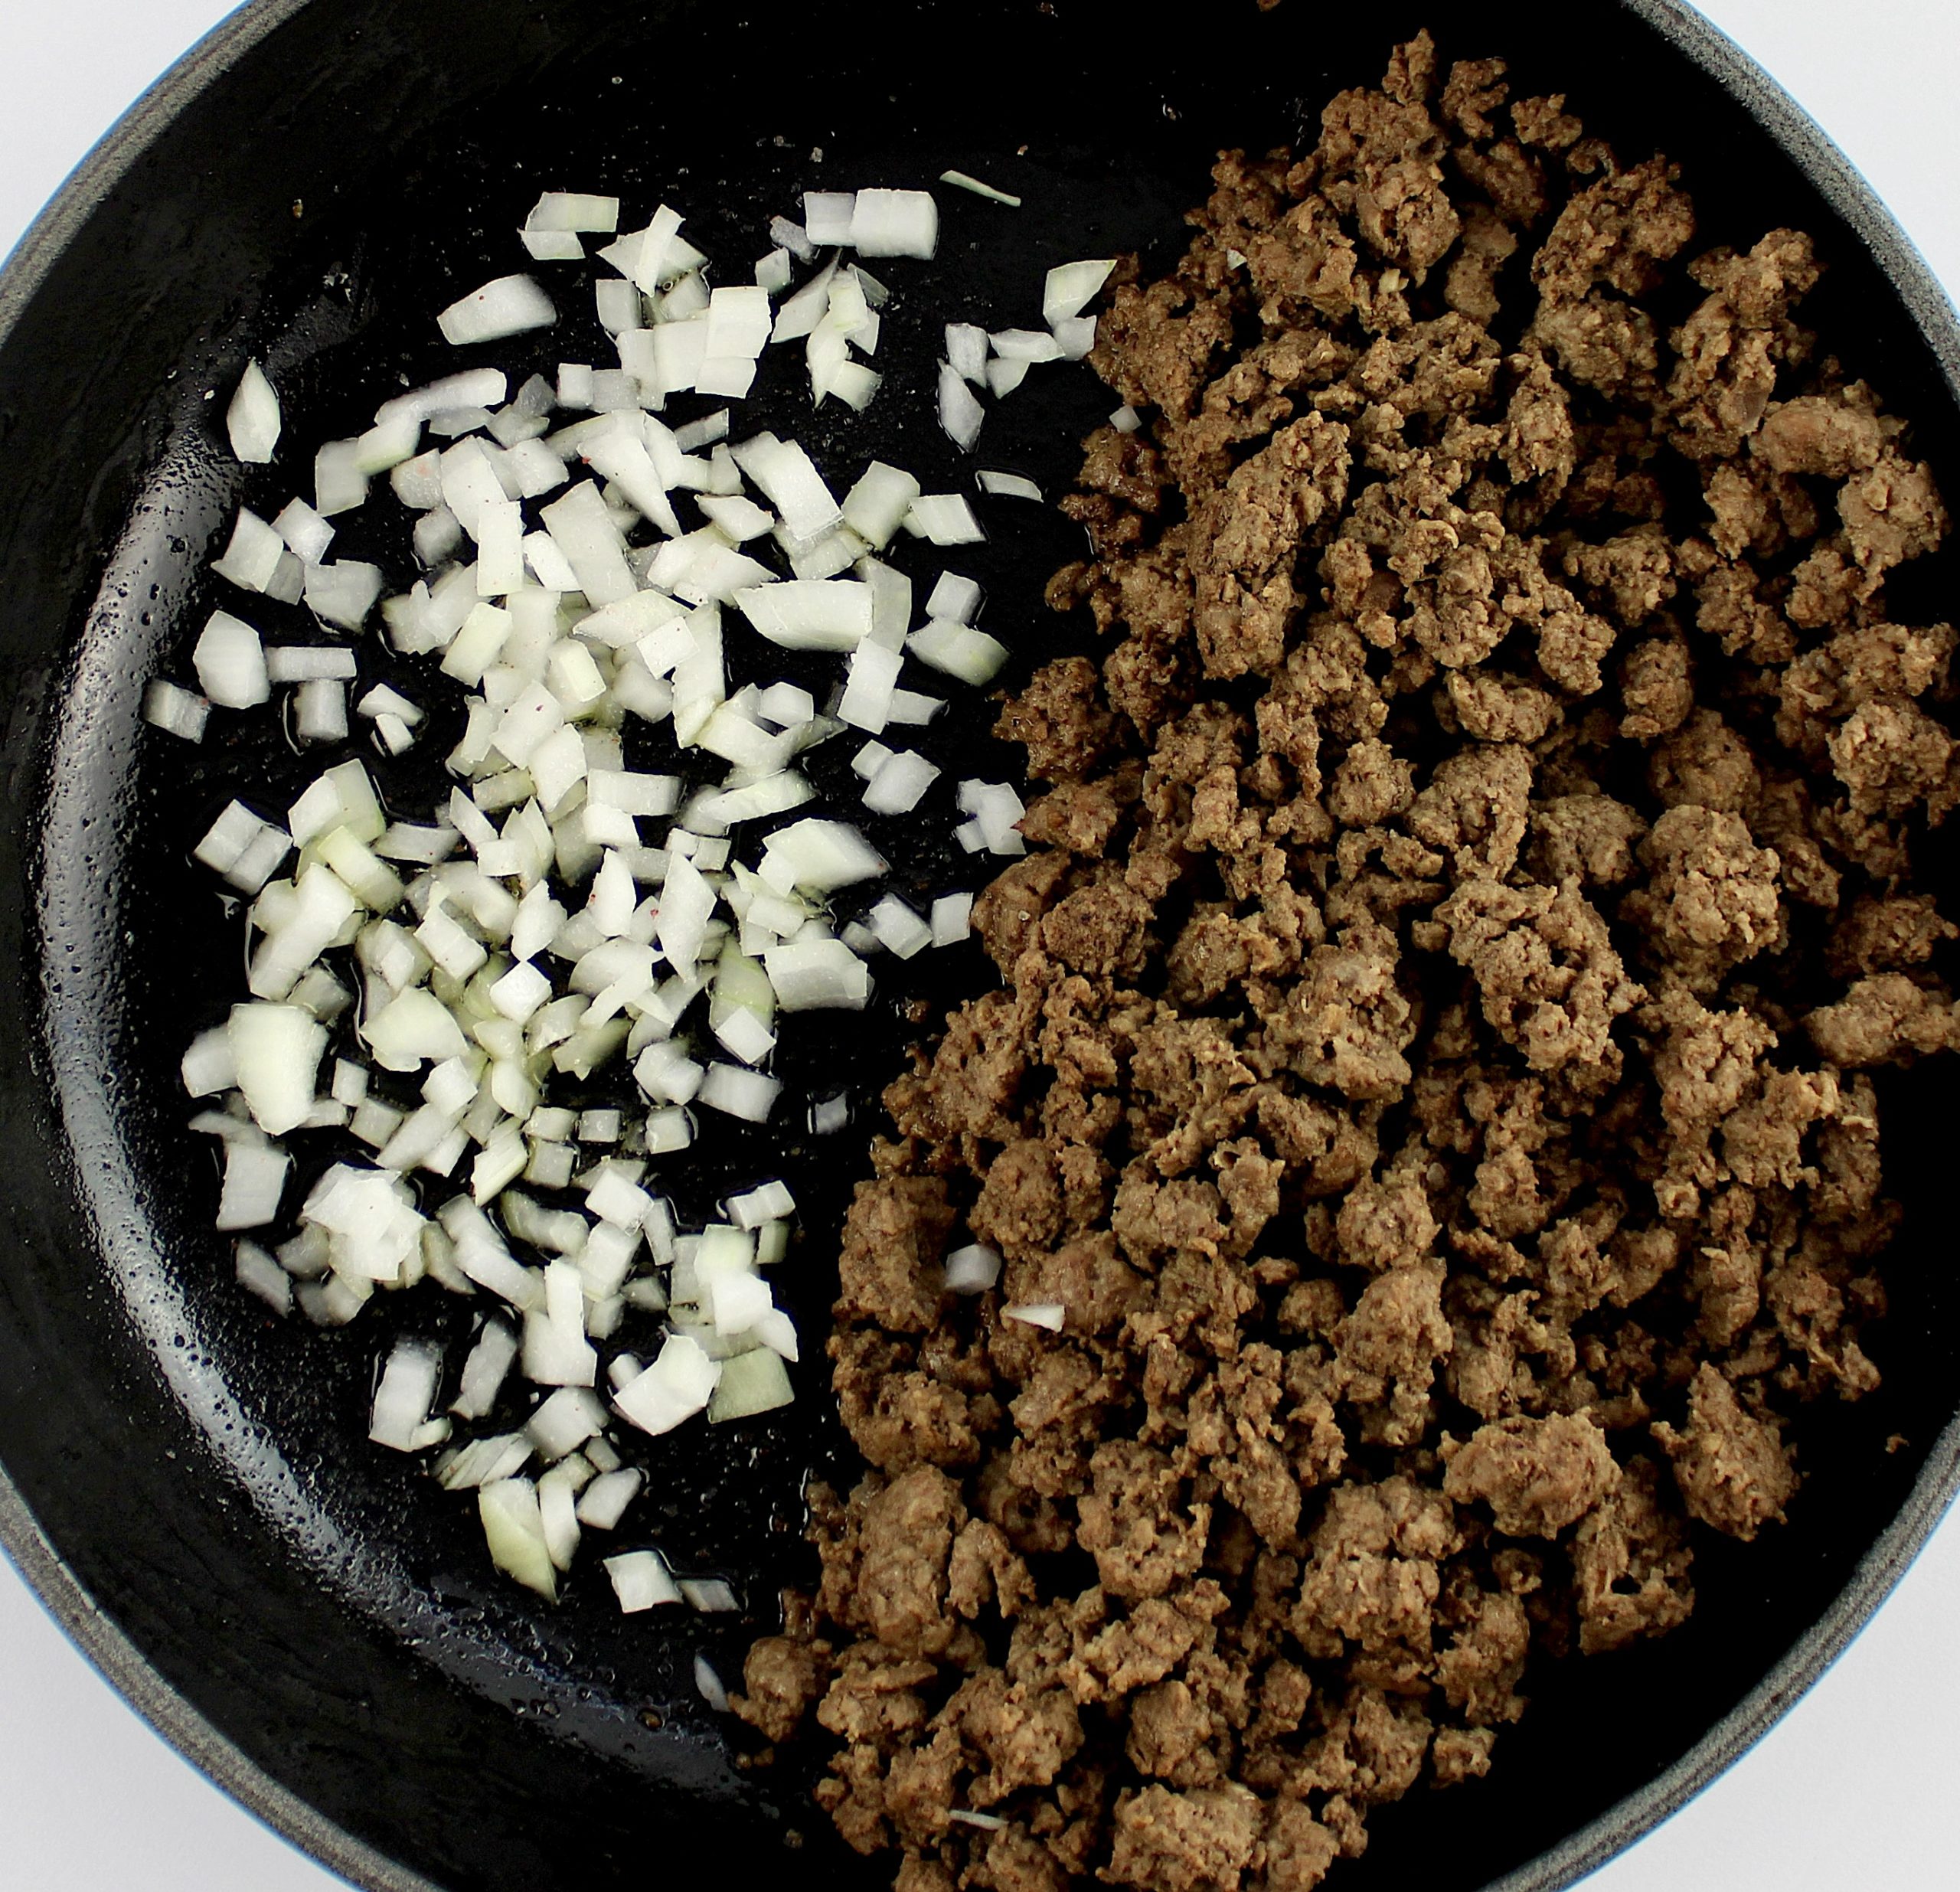 cooked ground beef on right side with raw minced onion on left side of skillet